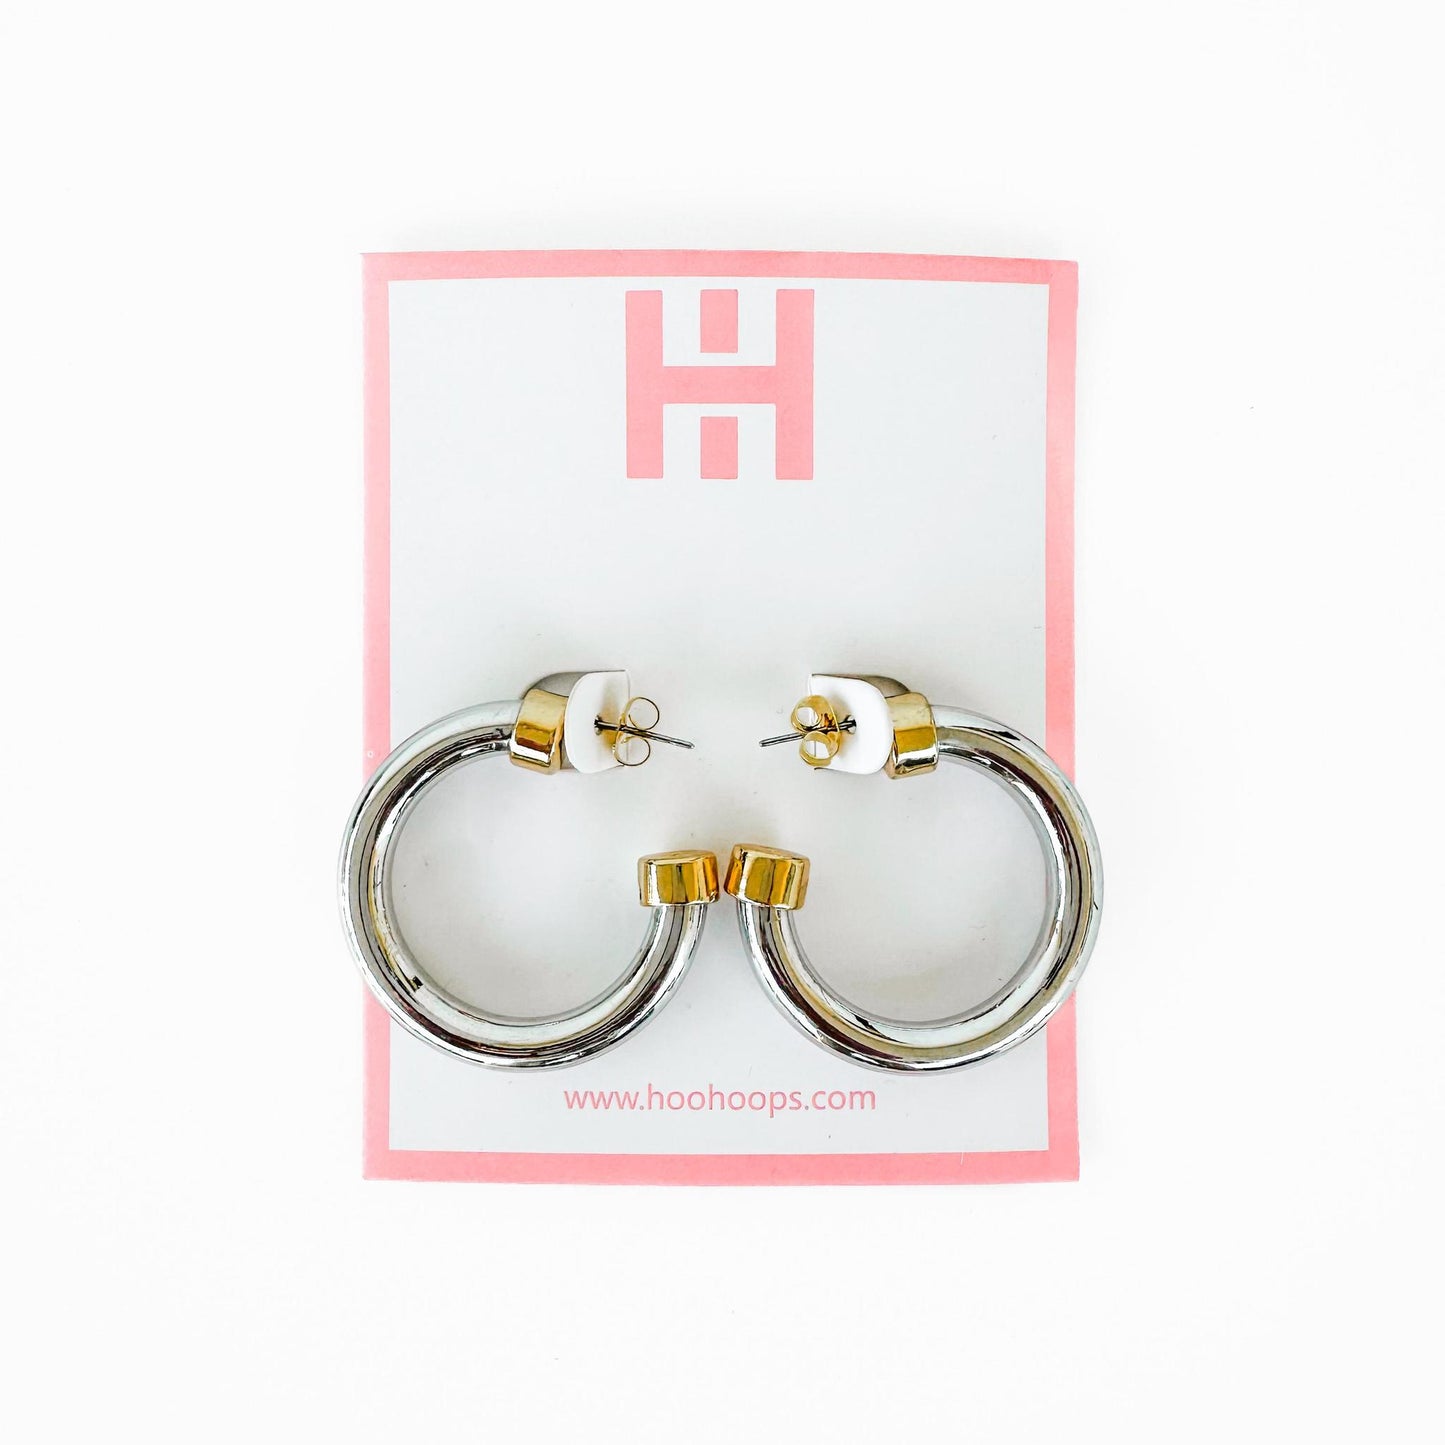 Hoo Hoops Mini- Silver with Gold Caps